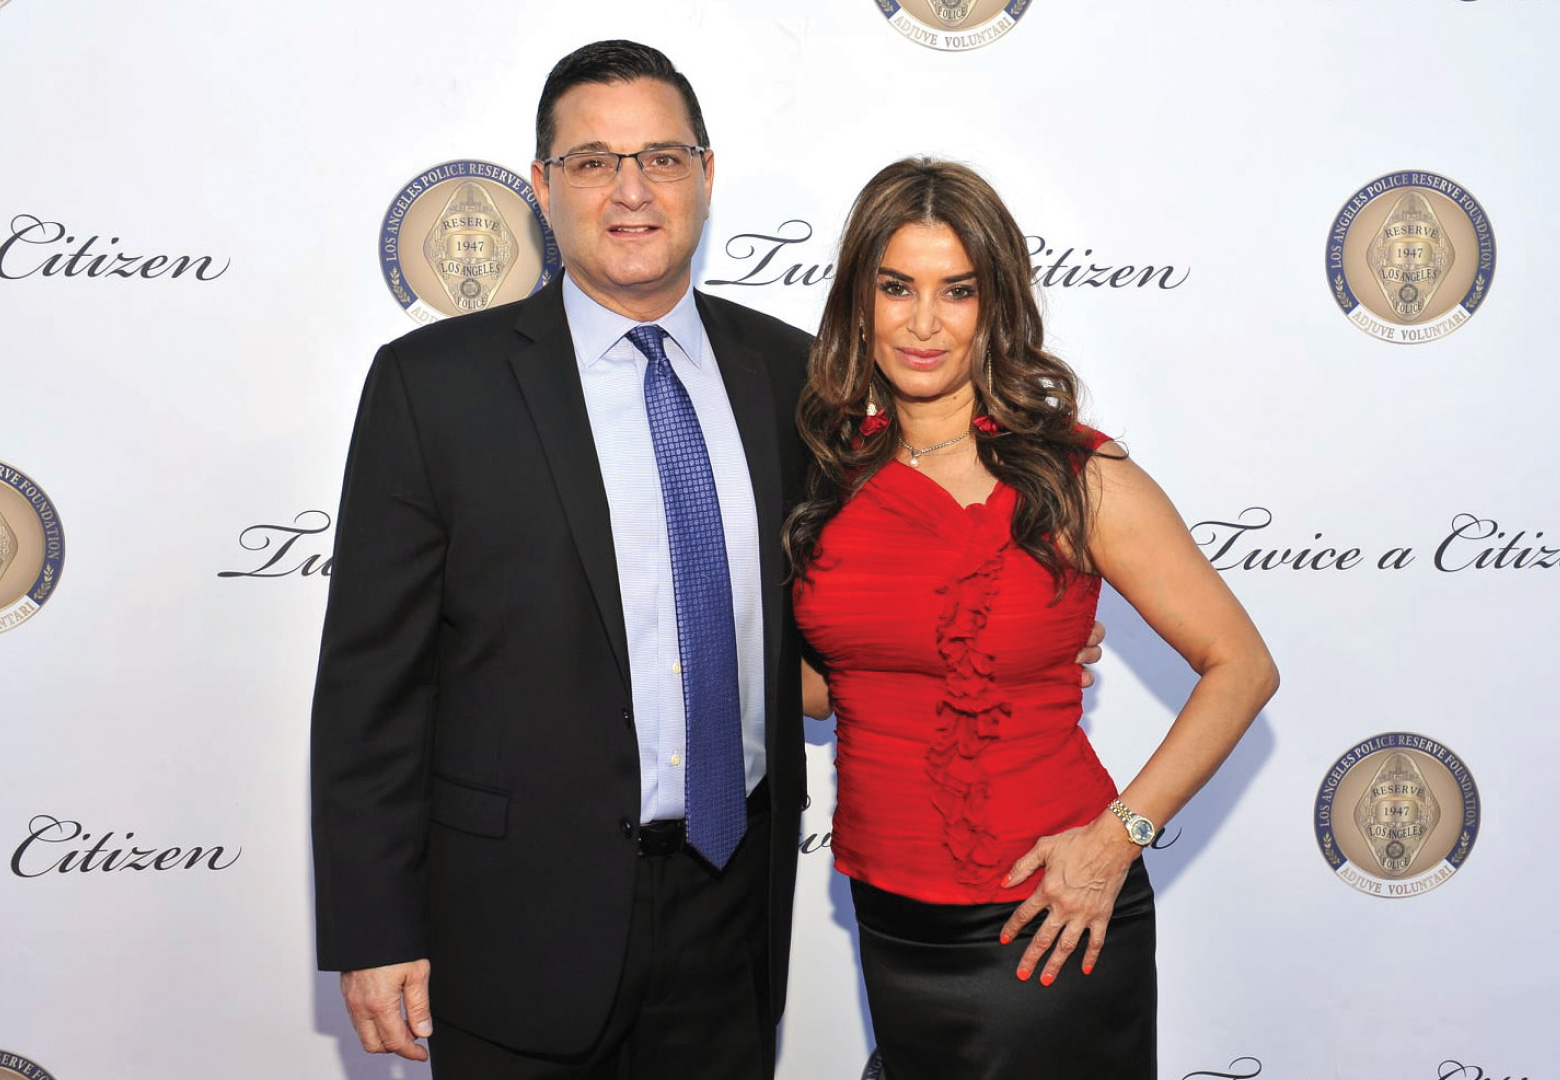 skirball-reopens-reserve-officer-of-the-year-twice-a-citizen-gala-8